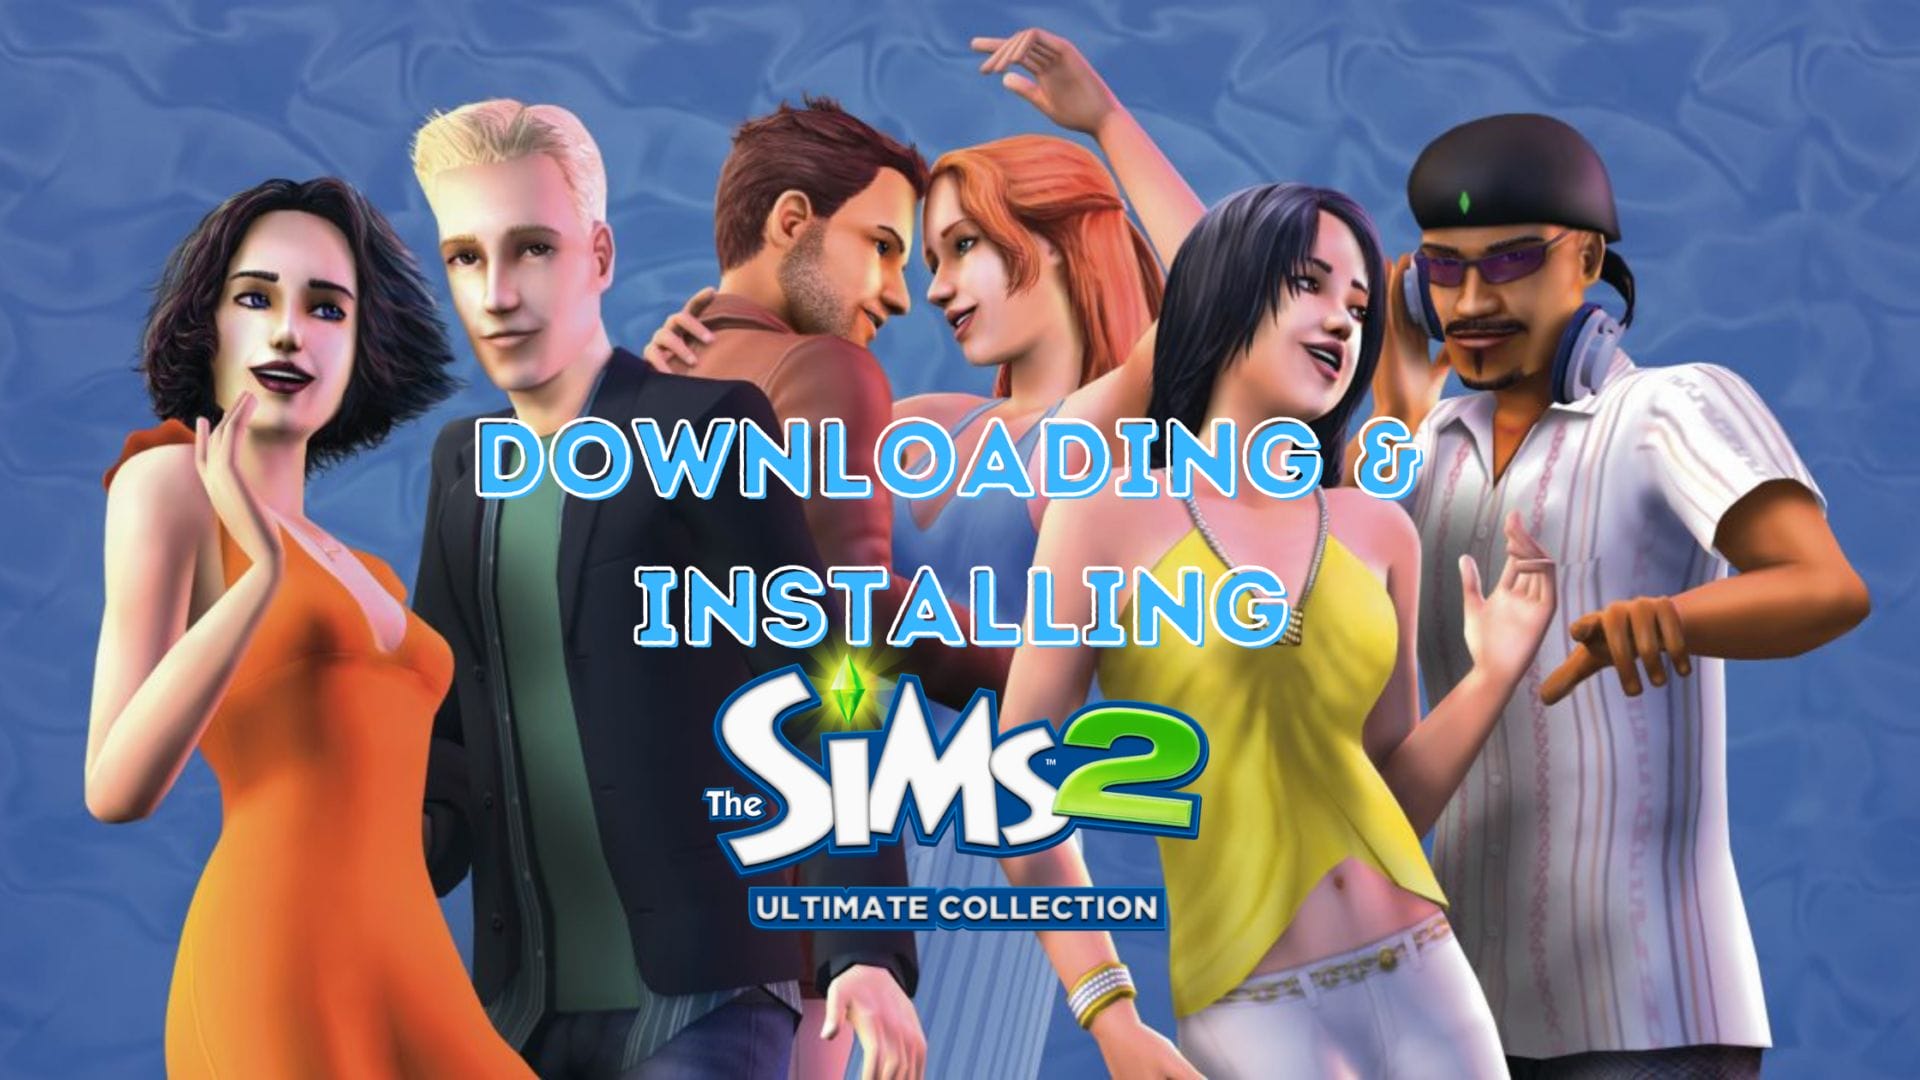 The Sims 2: Castaway - Old Games Download